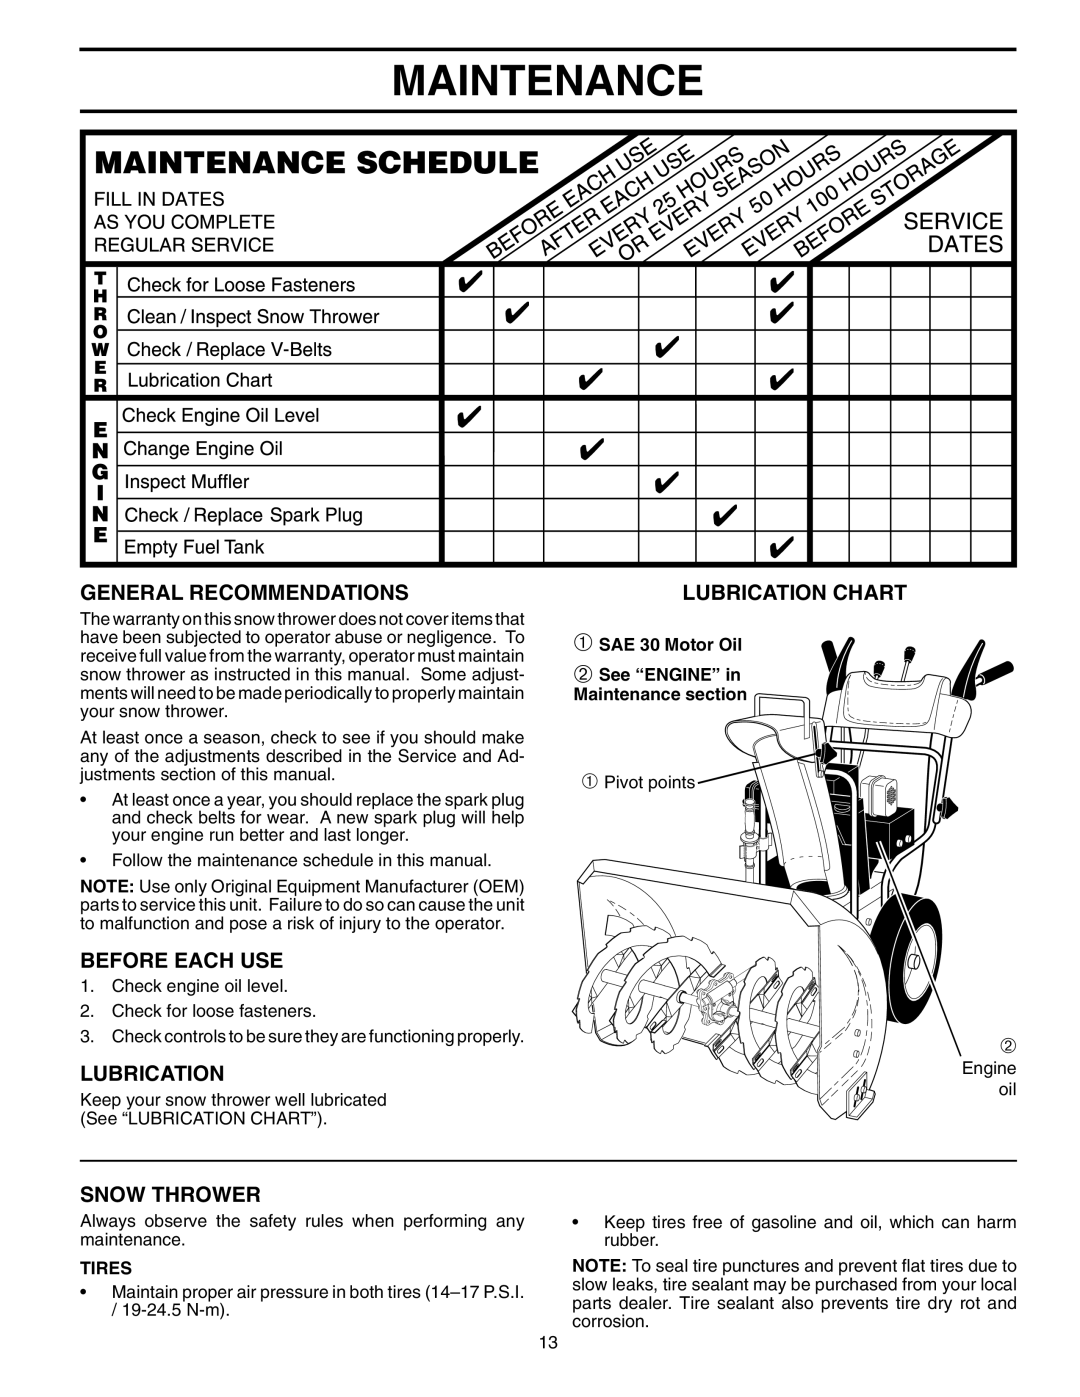 Husqvarna 524S Maintenance, General Recommendations, Before Each Use, Snow Thrower, Lubrication Chart, Tires 